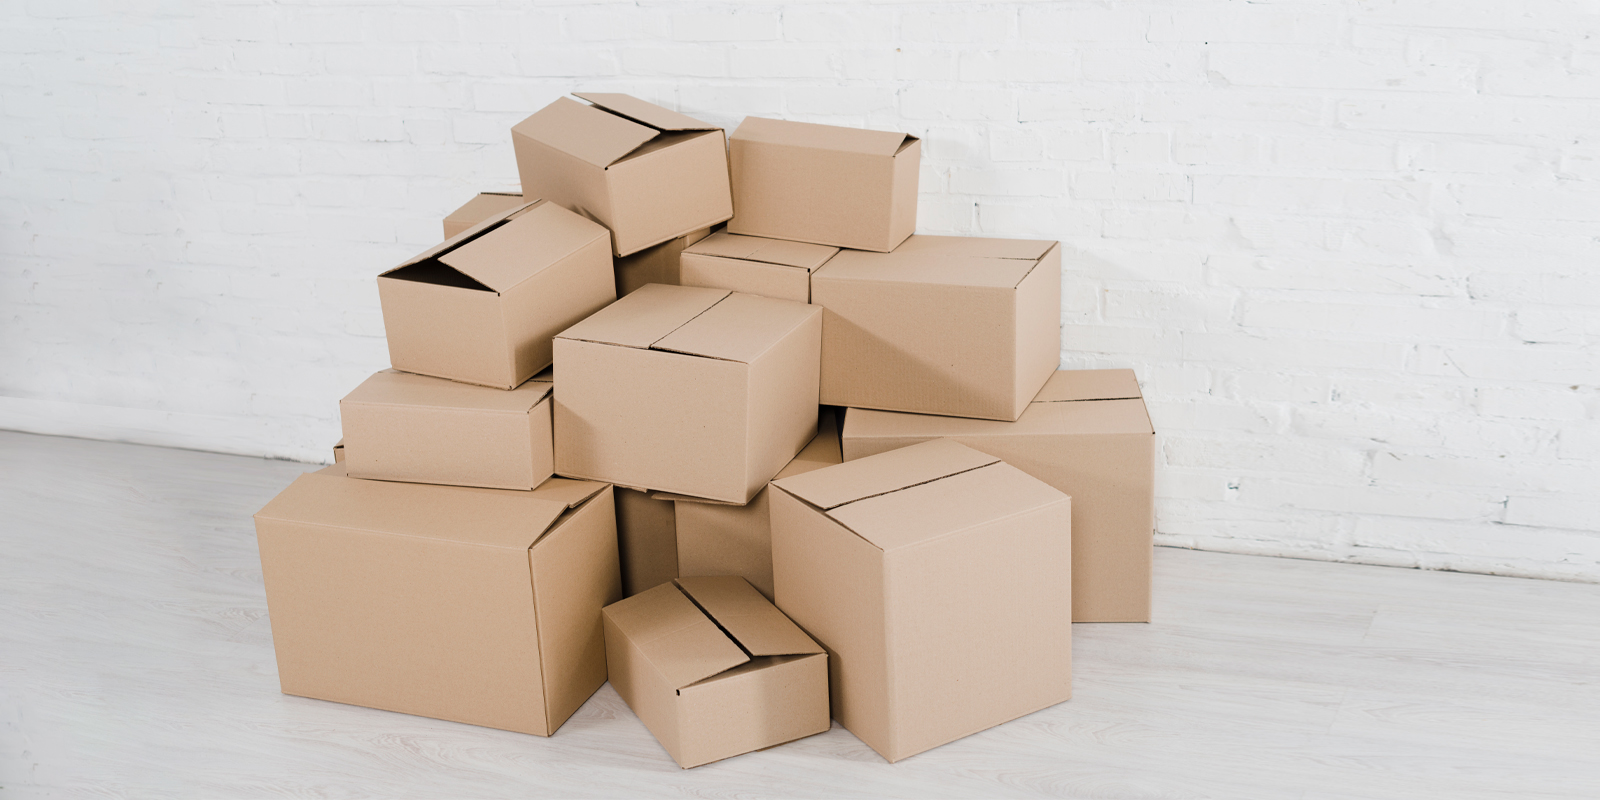 Shipping cartons in Cairns - Print with Pagerr